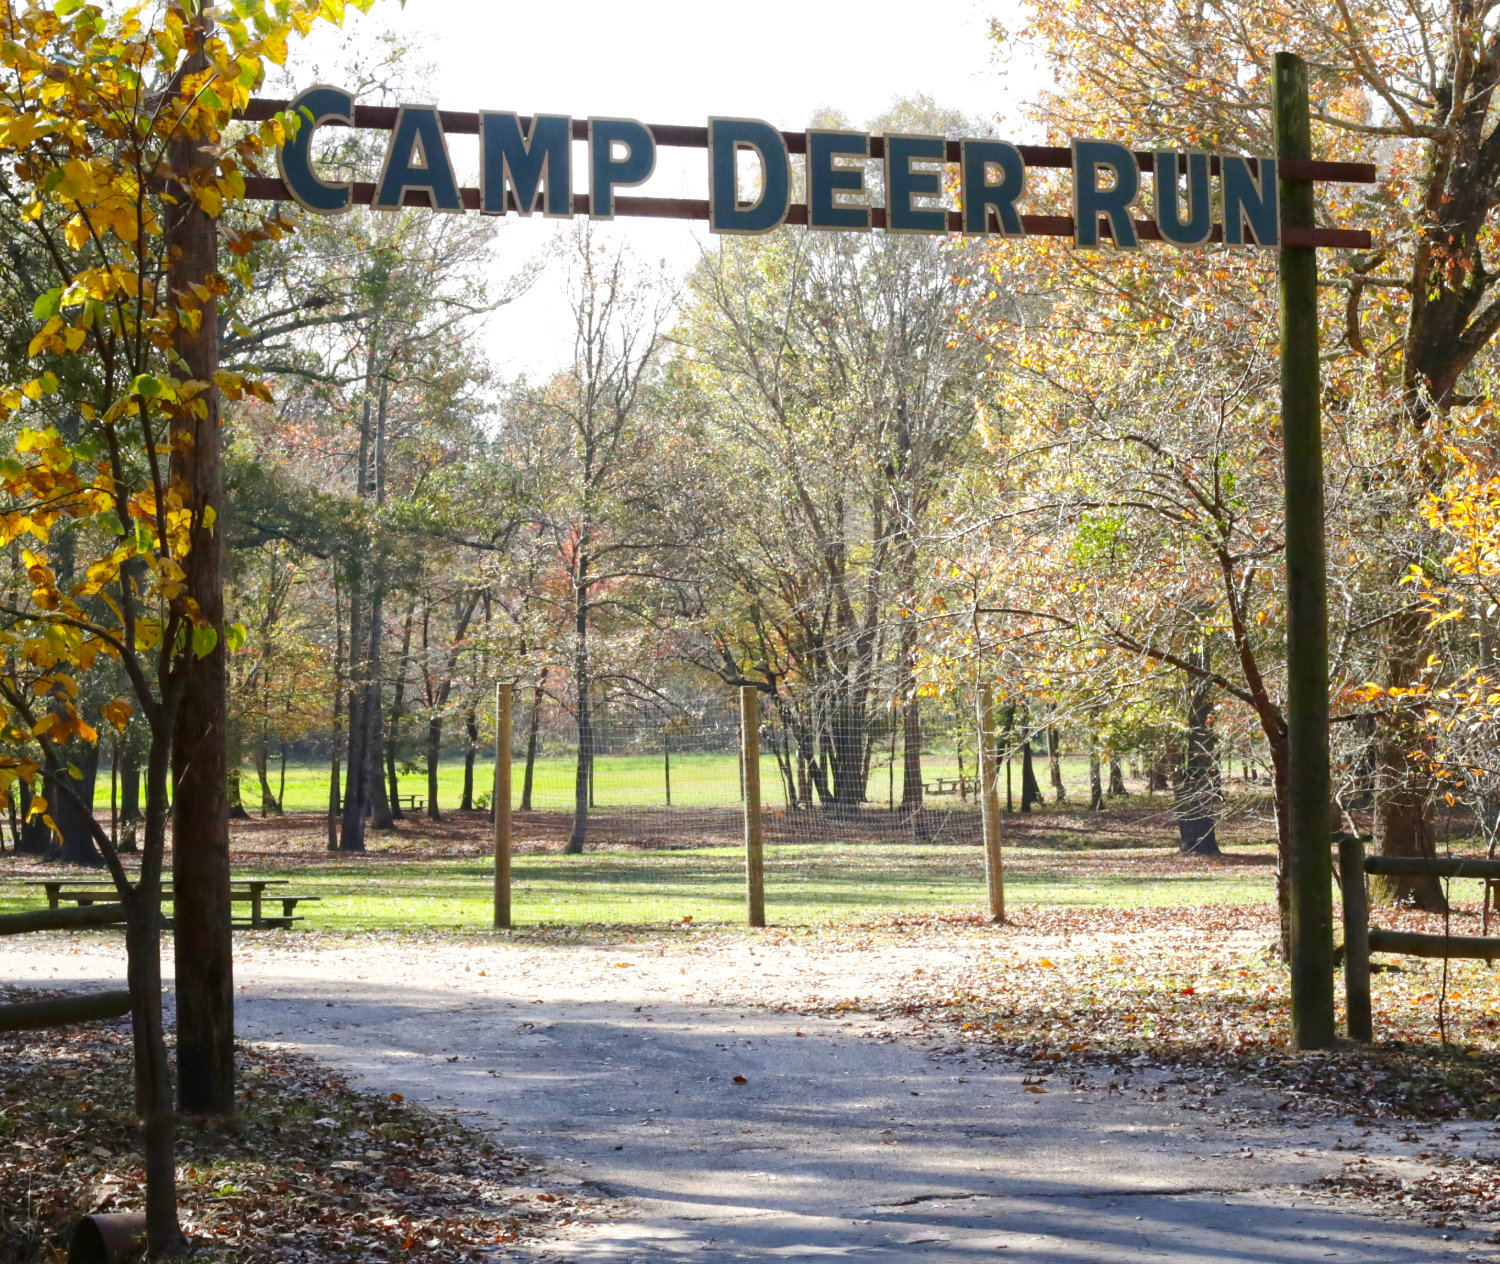 The scenic entrance to Camp Deer Run in northeastern Wood County.